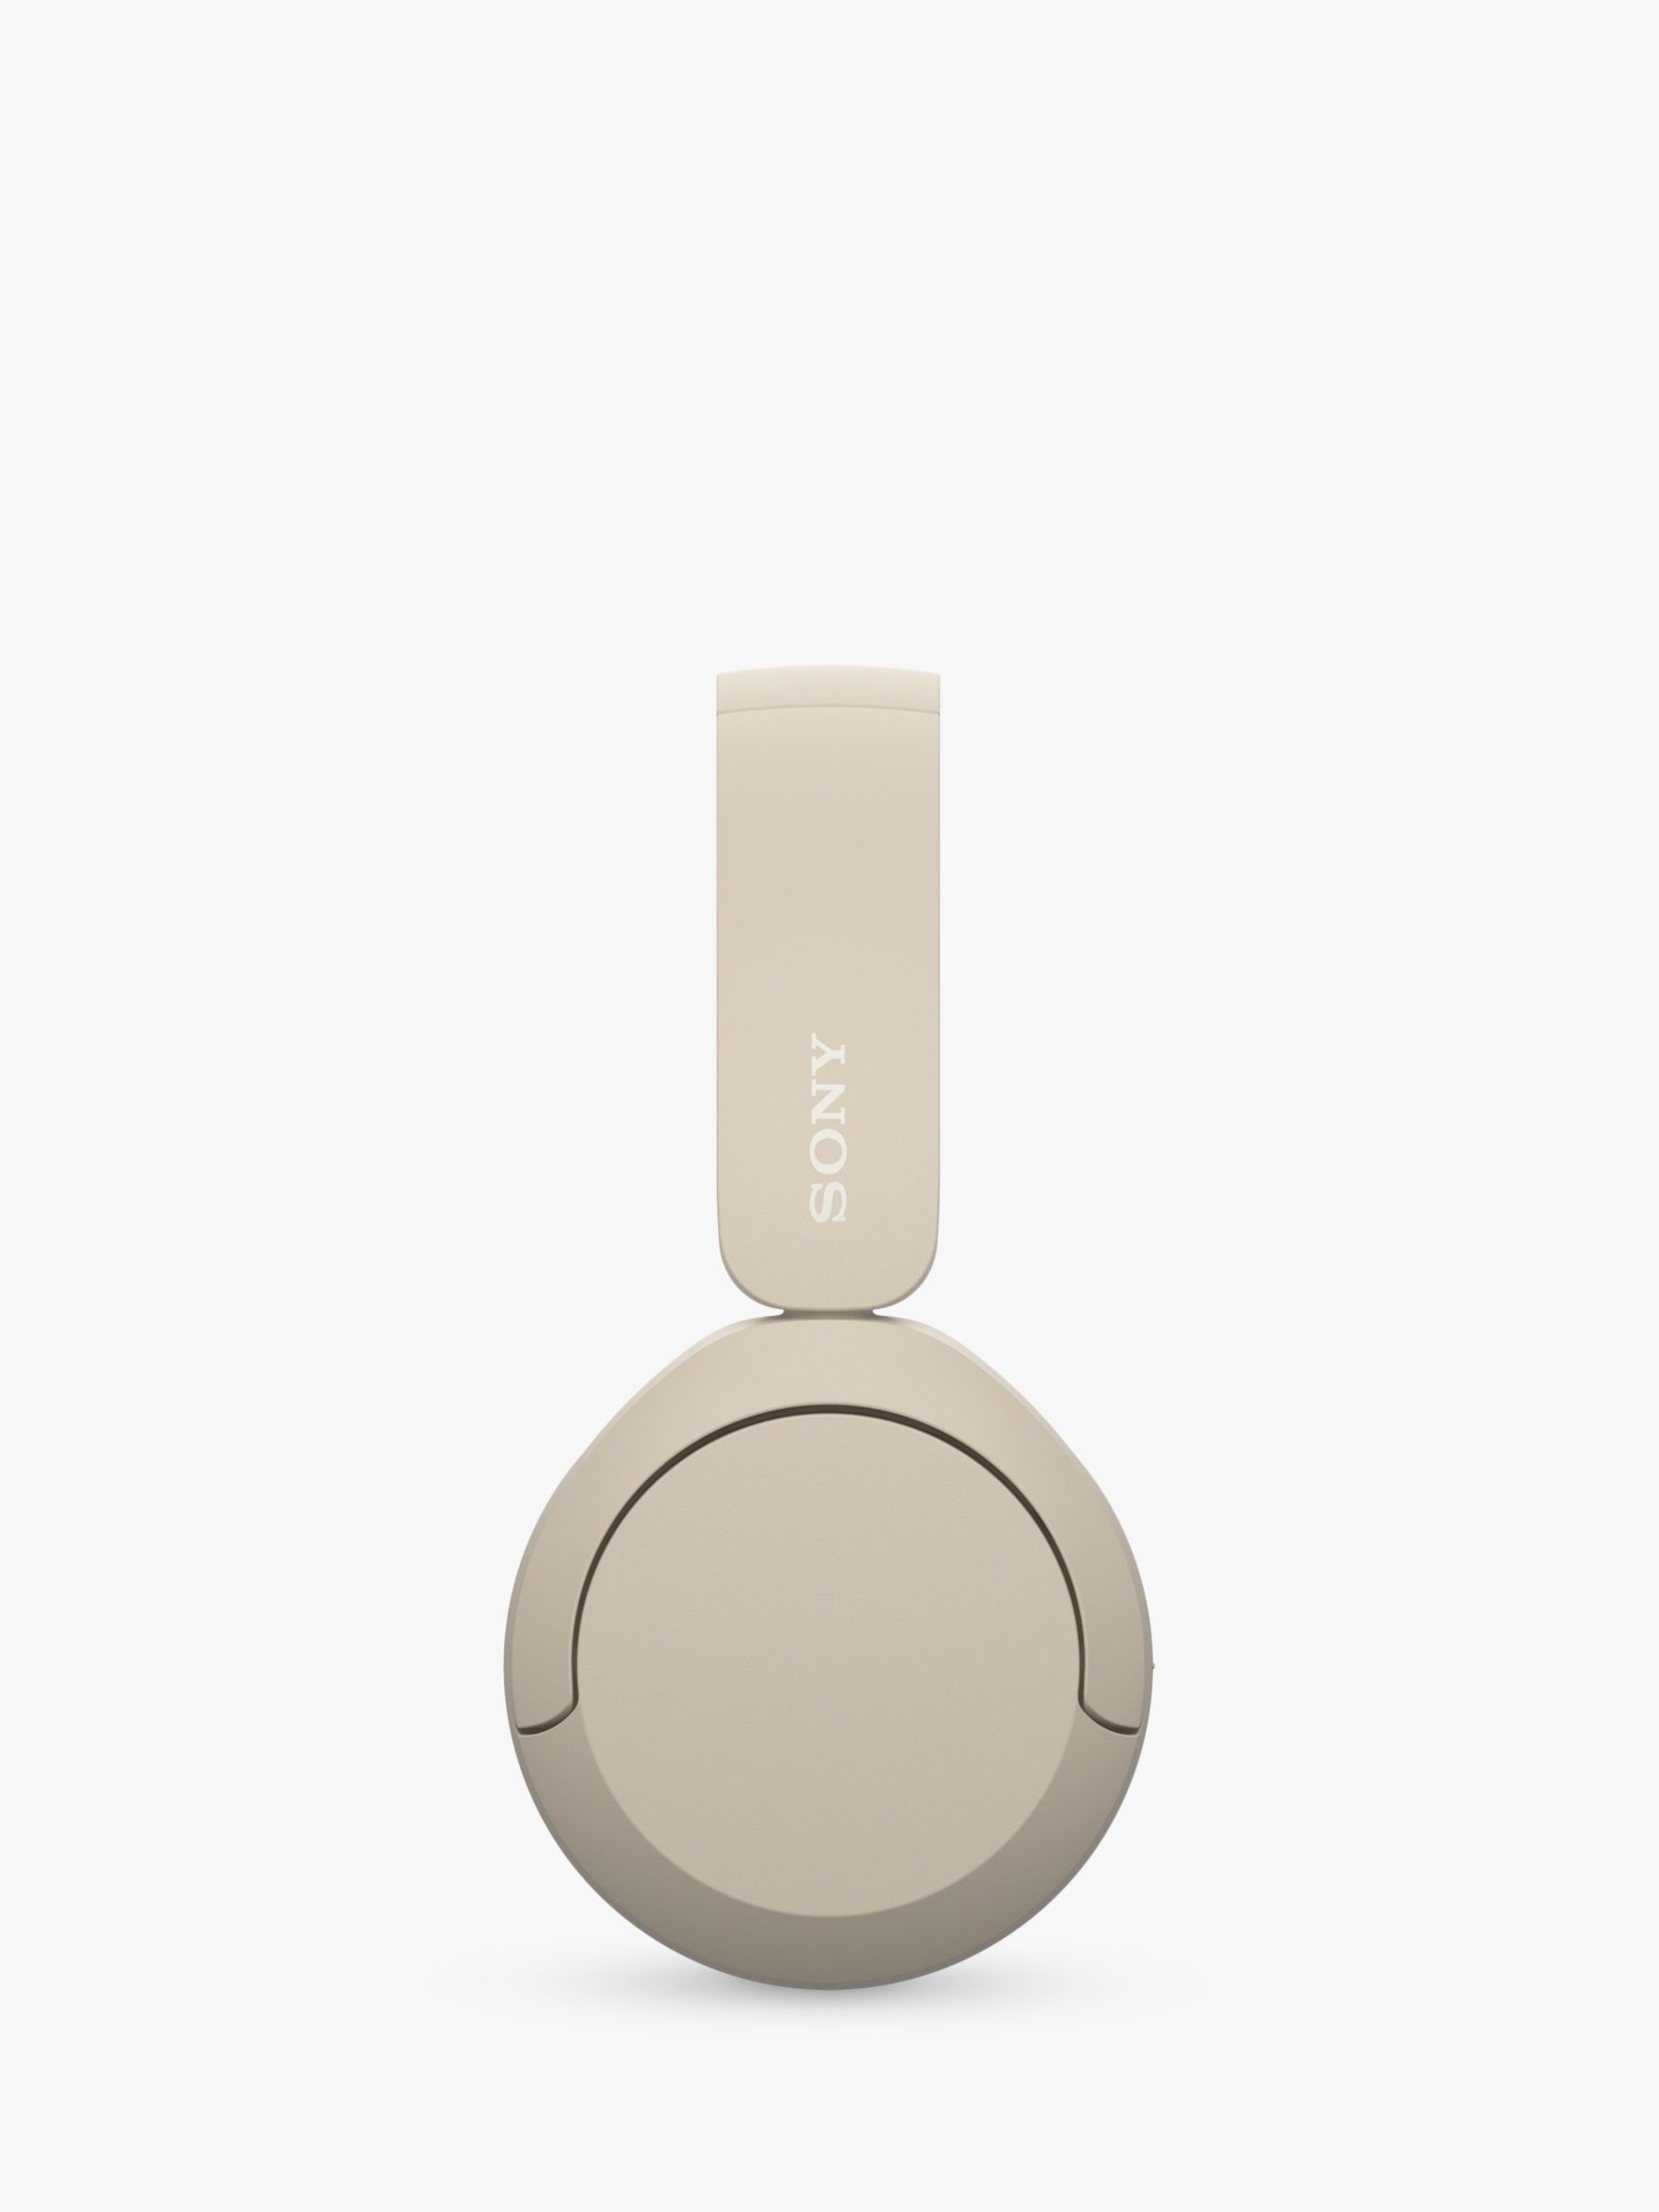 Sony WH-CH520 Bluetooth Wireless On-Ear Headphones with Mic/Remote, Beige